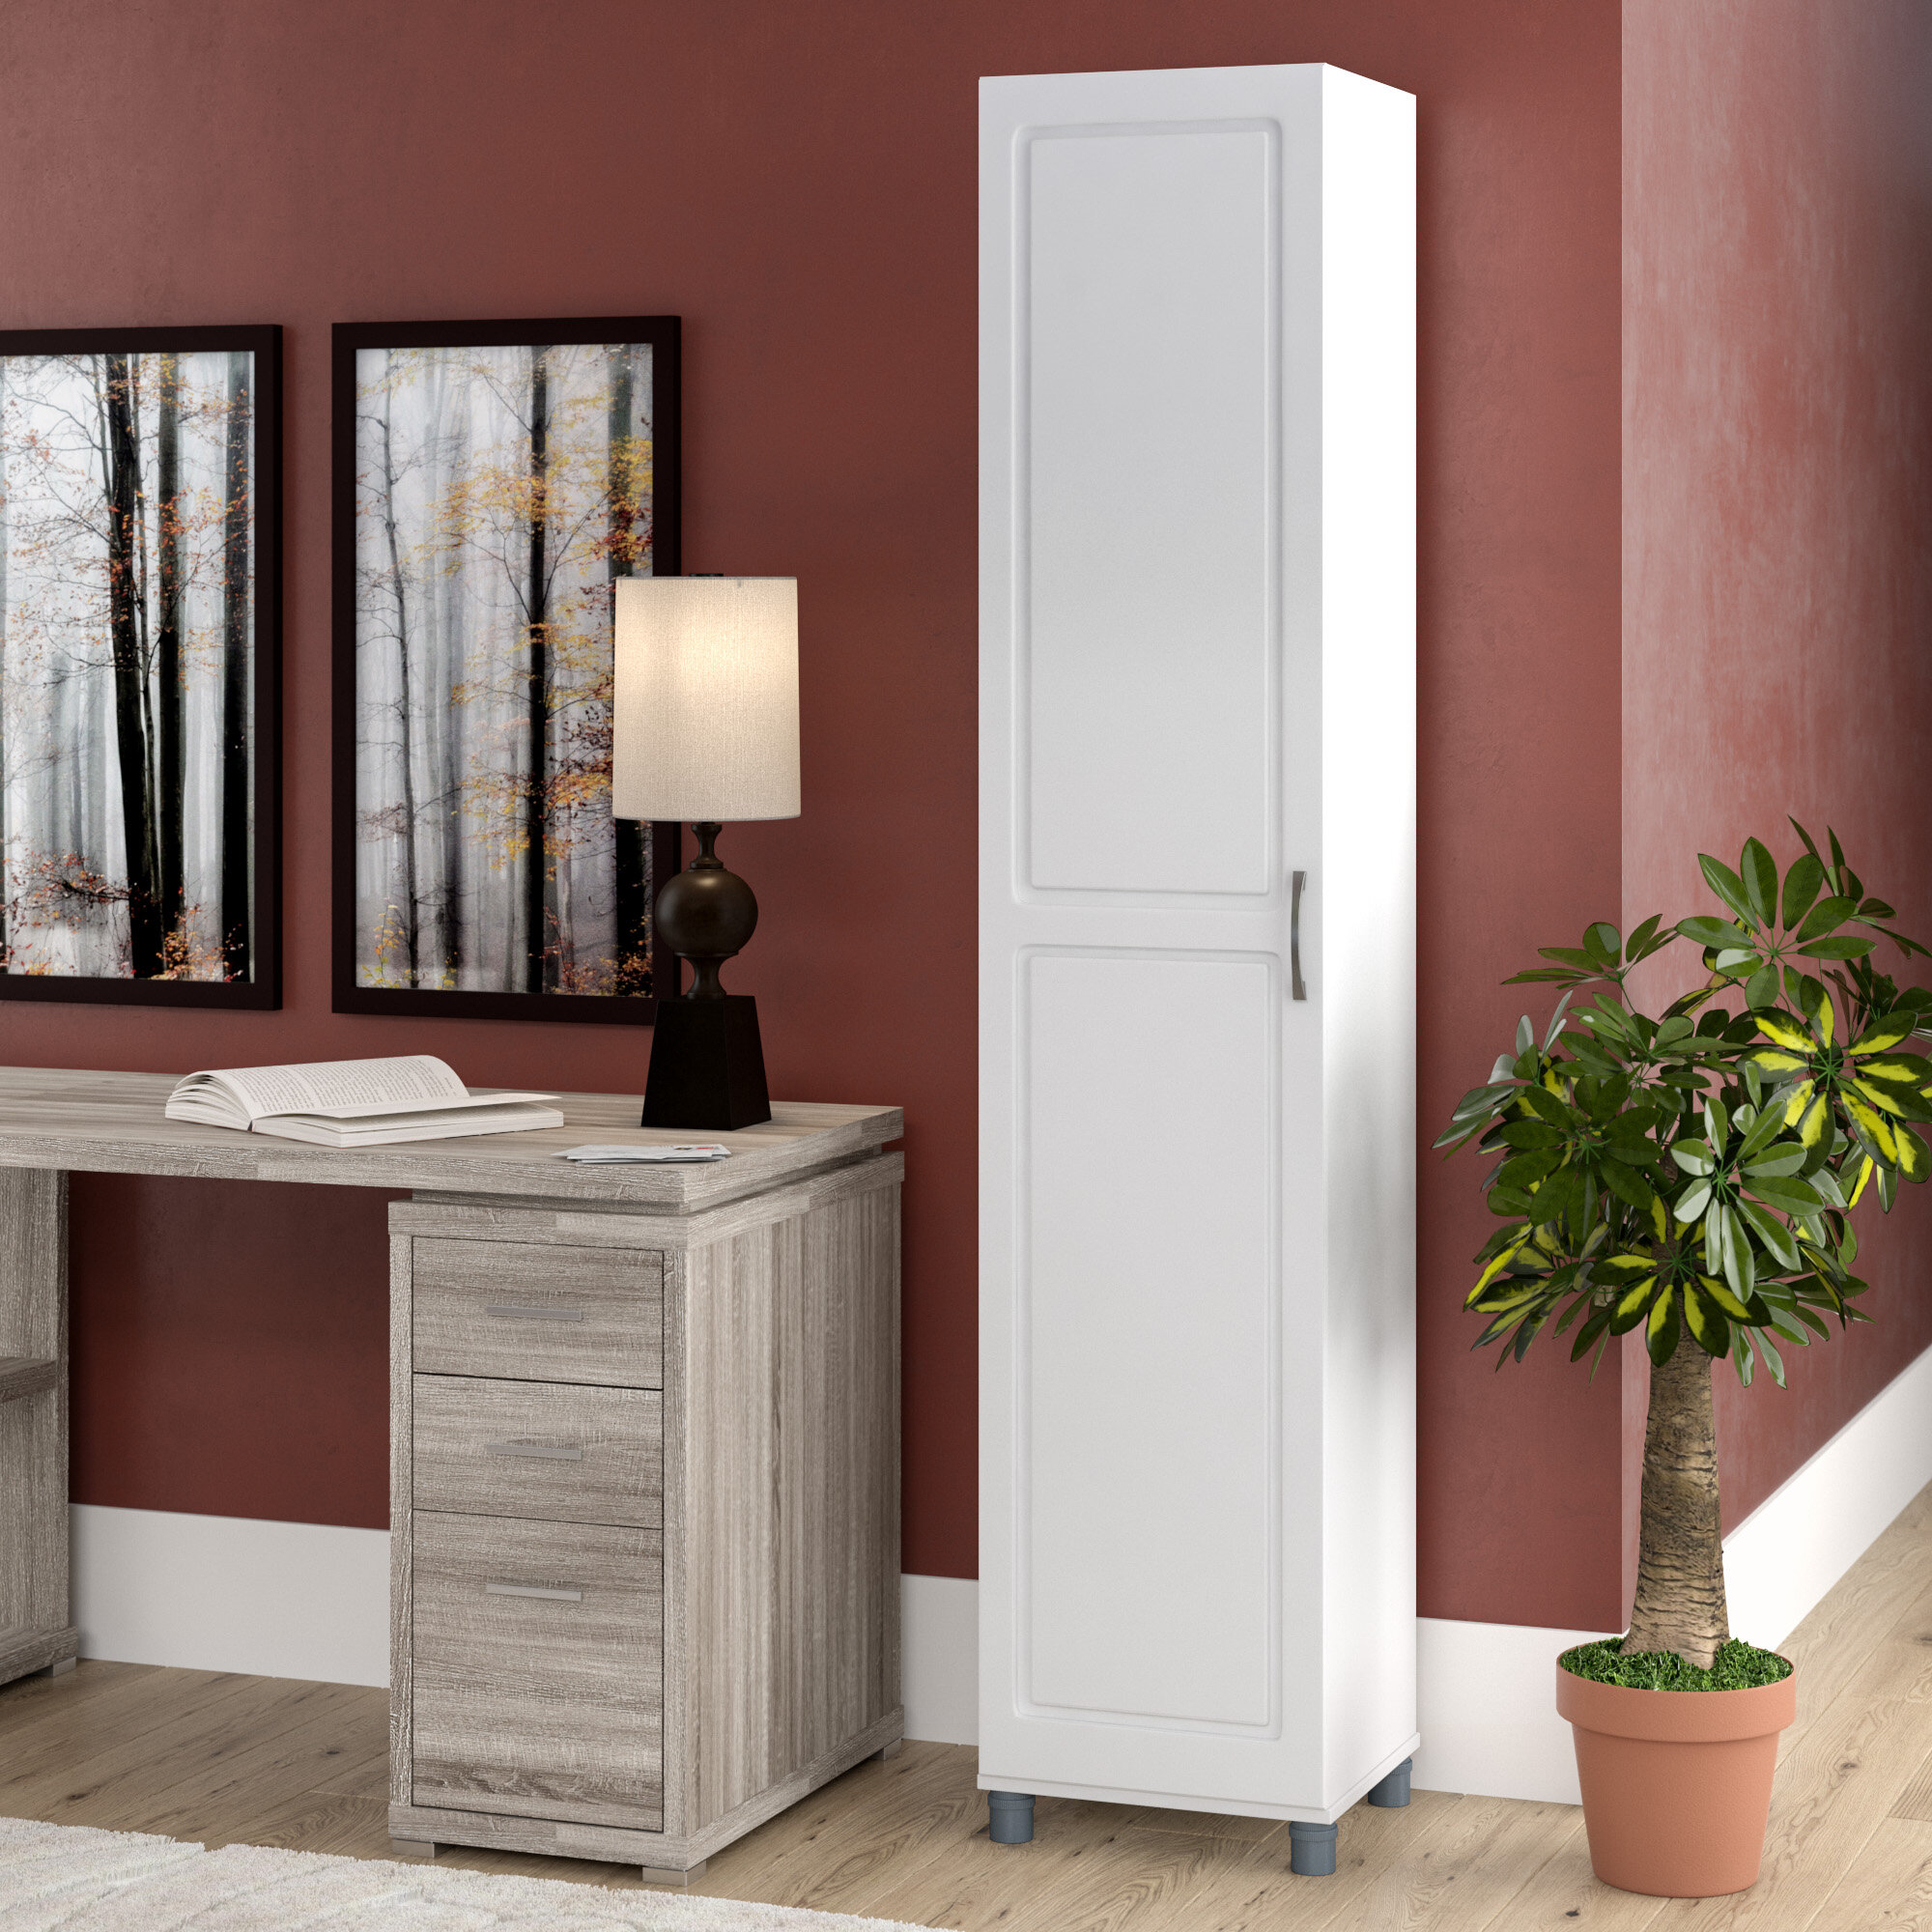 Tall Wood Storage Cabinets With Doors, Tall Slim Cabinet With Doors